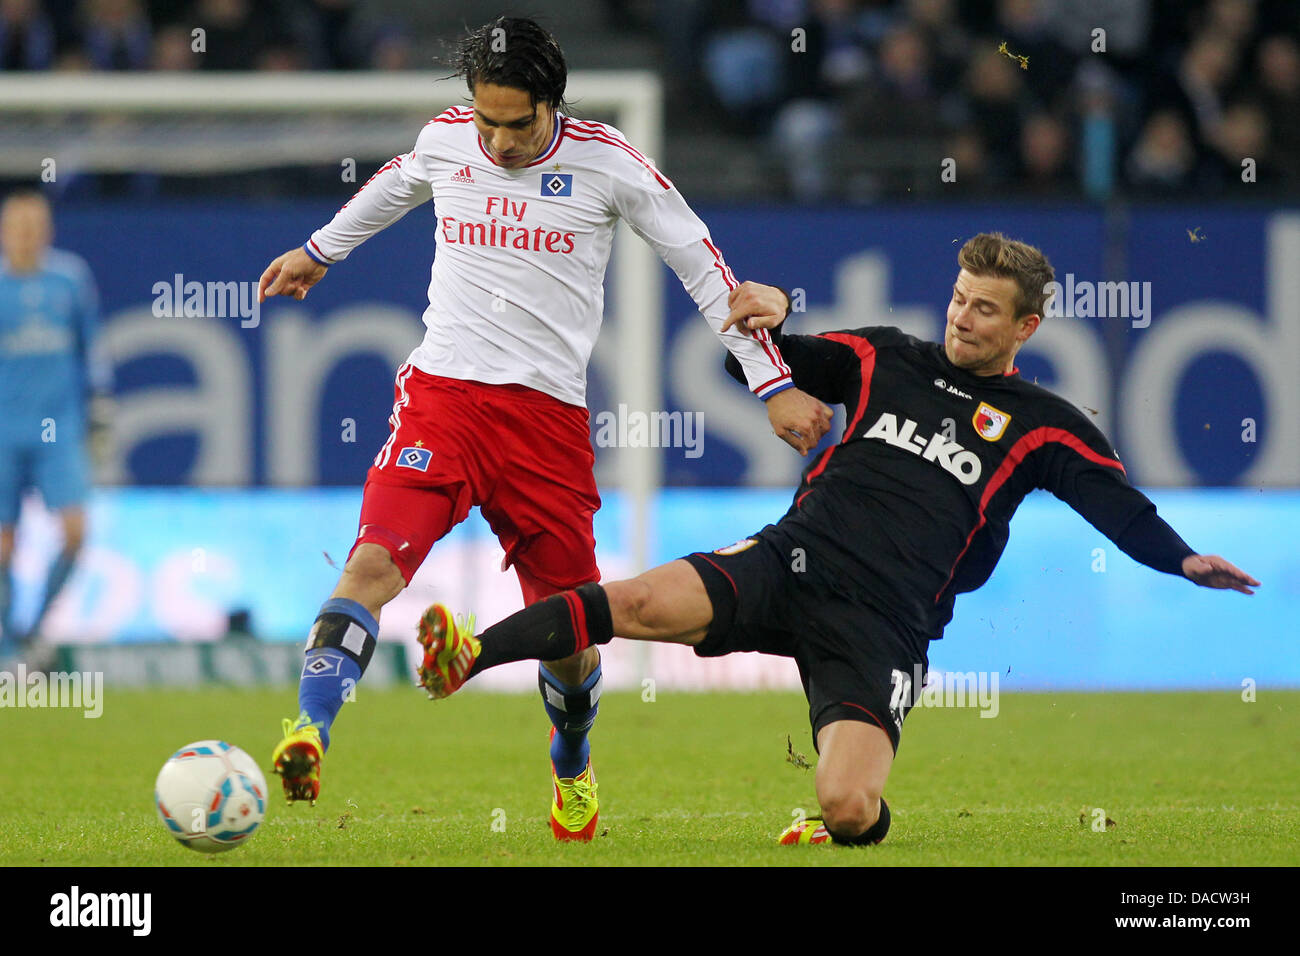 Hamburg's Jose Paolo Guerrero (L) vies for the ball with Augsburg's Daniel Baier during the German Bundesliga match between Hamburger SV and FC Augsburg at Imtech Arena in Hamburg, Germany, 17 December 2011. Photo: MALTE CHRISTIANS  (ATTENTION: EMBARGO CONDITIONS! The DFL permits the further utilisation of the pictures in IPTV, mobile services and other new technologies only no ear Stock Photo